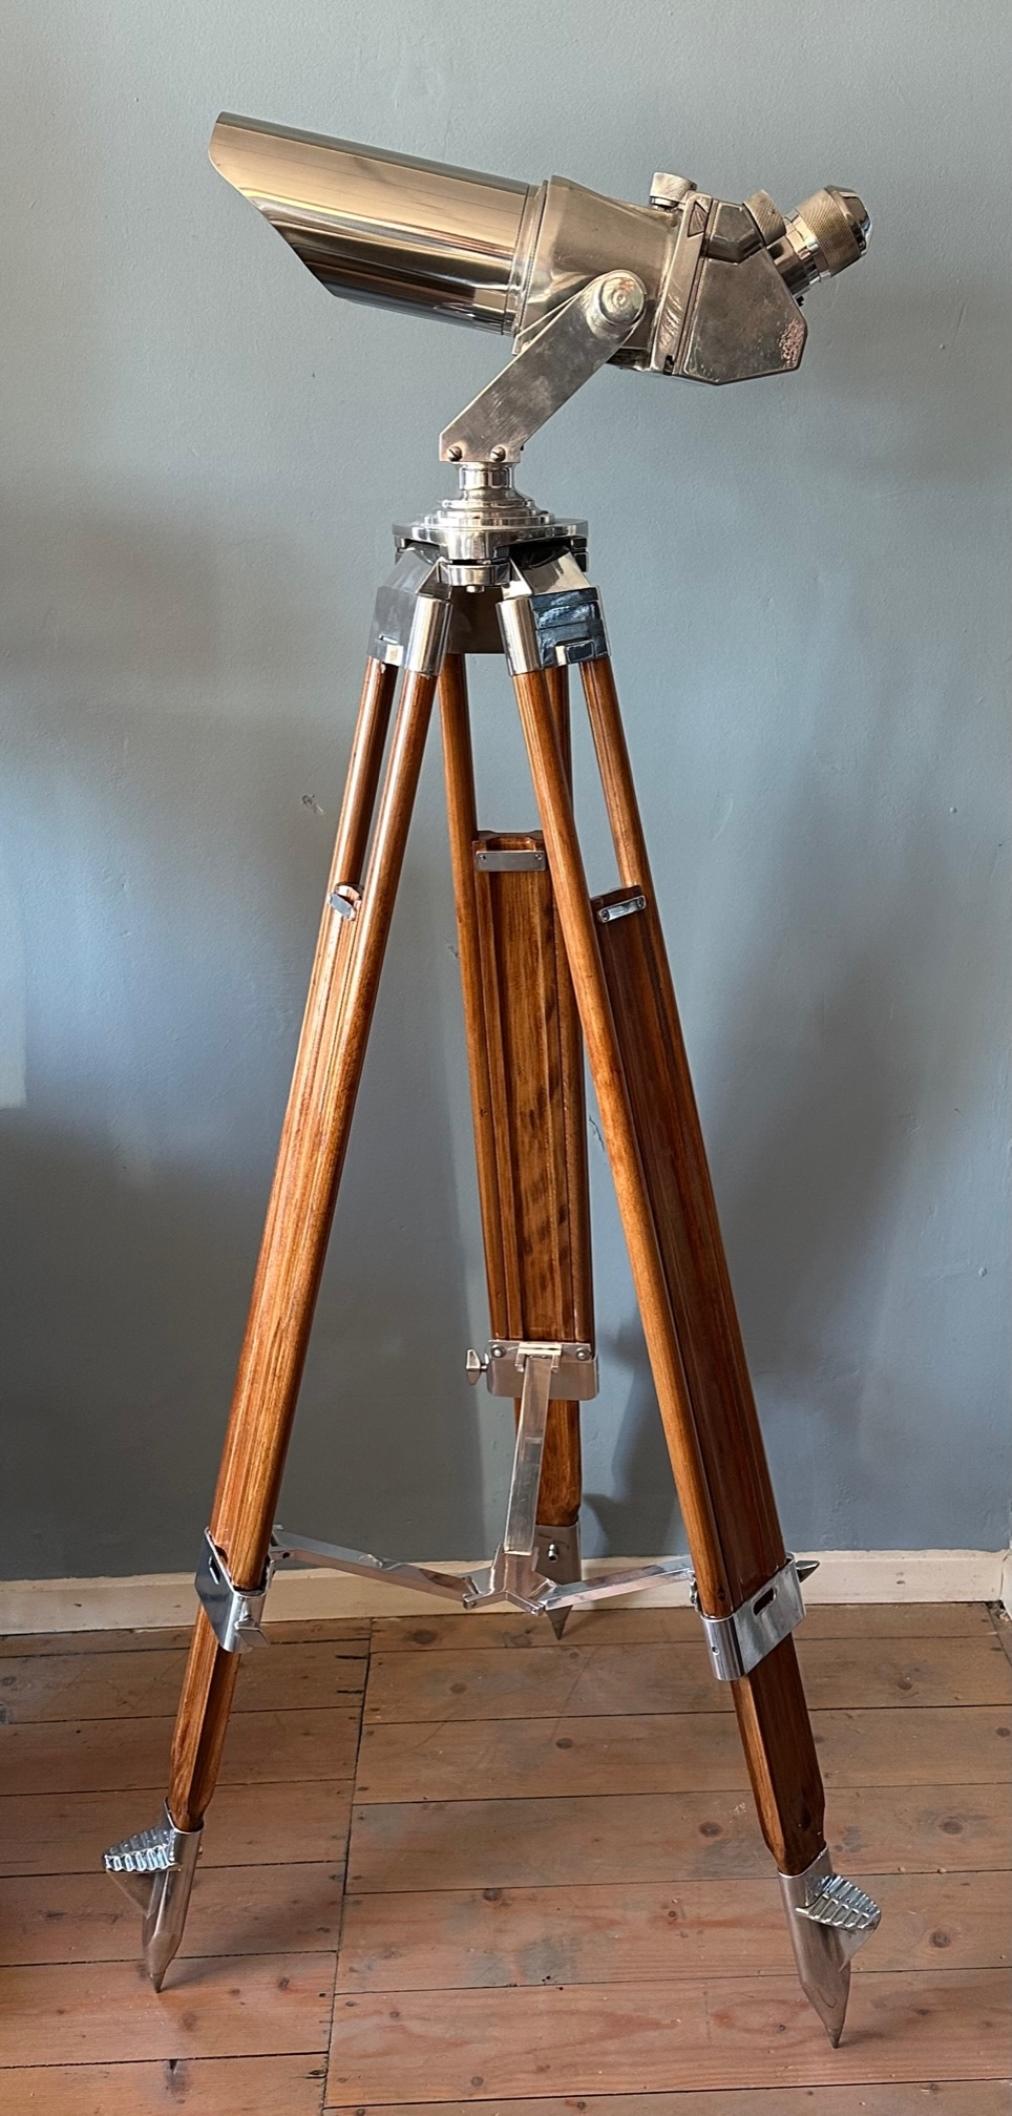 Polished Observation Binoculars 10 x 80 – from Schneider from Kreuznach
WW2 Binoculars made by the German company in the period 1940-1943
D.F. (Doppel Fernrohe) 10 x 80 observation binoculars with four built-in filters. Optical quality is